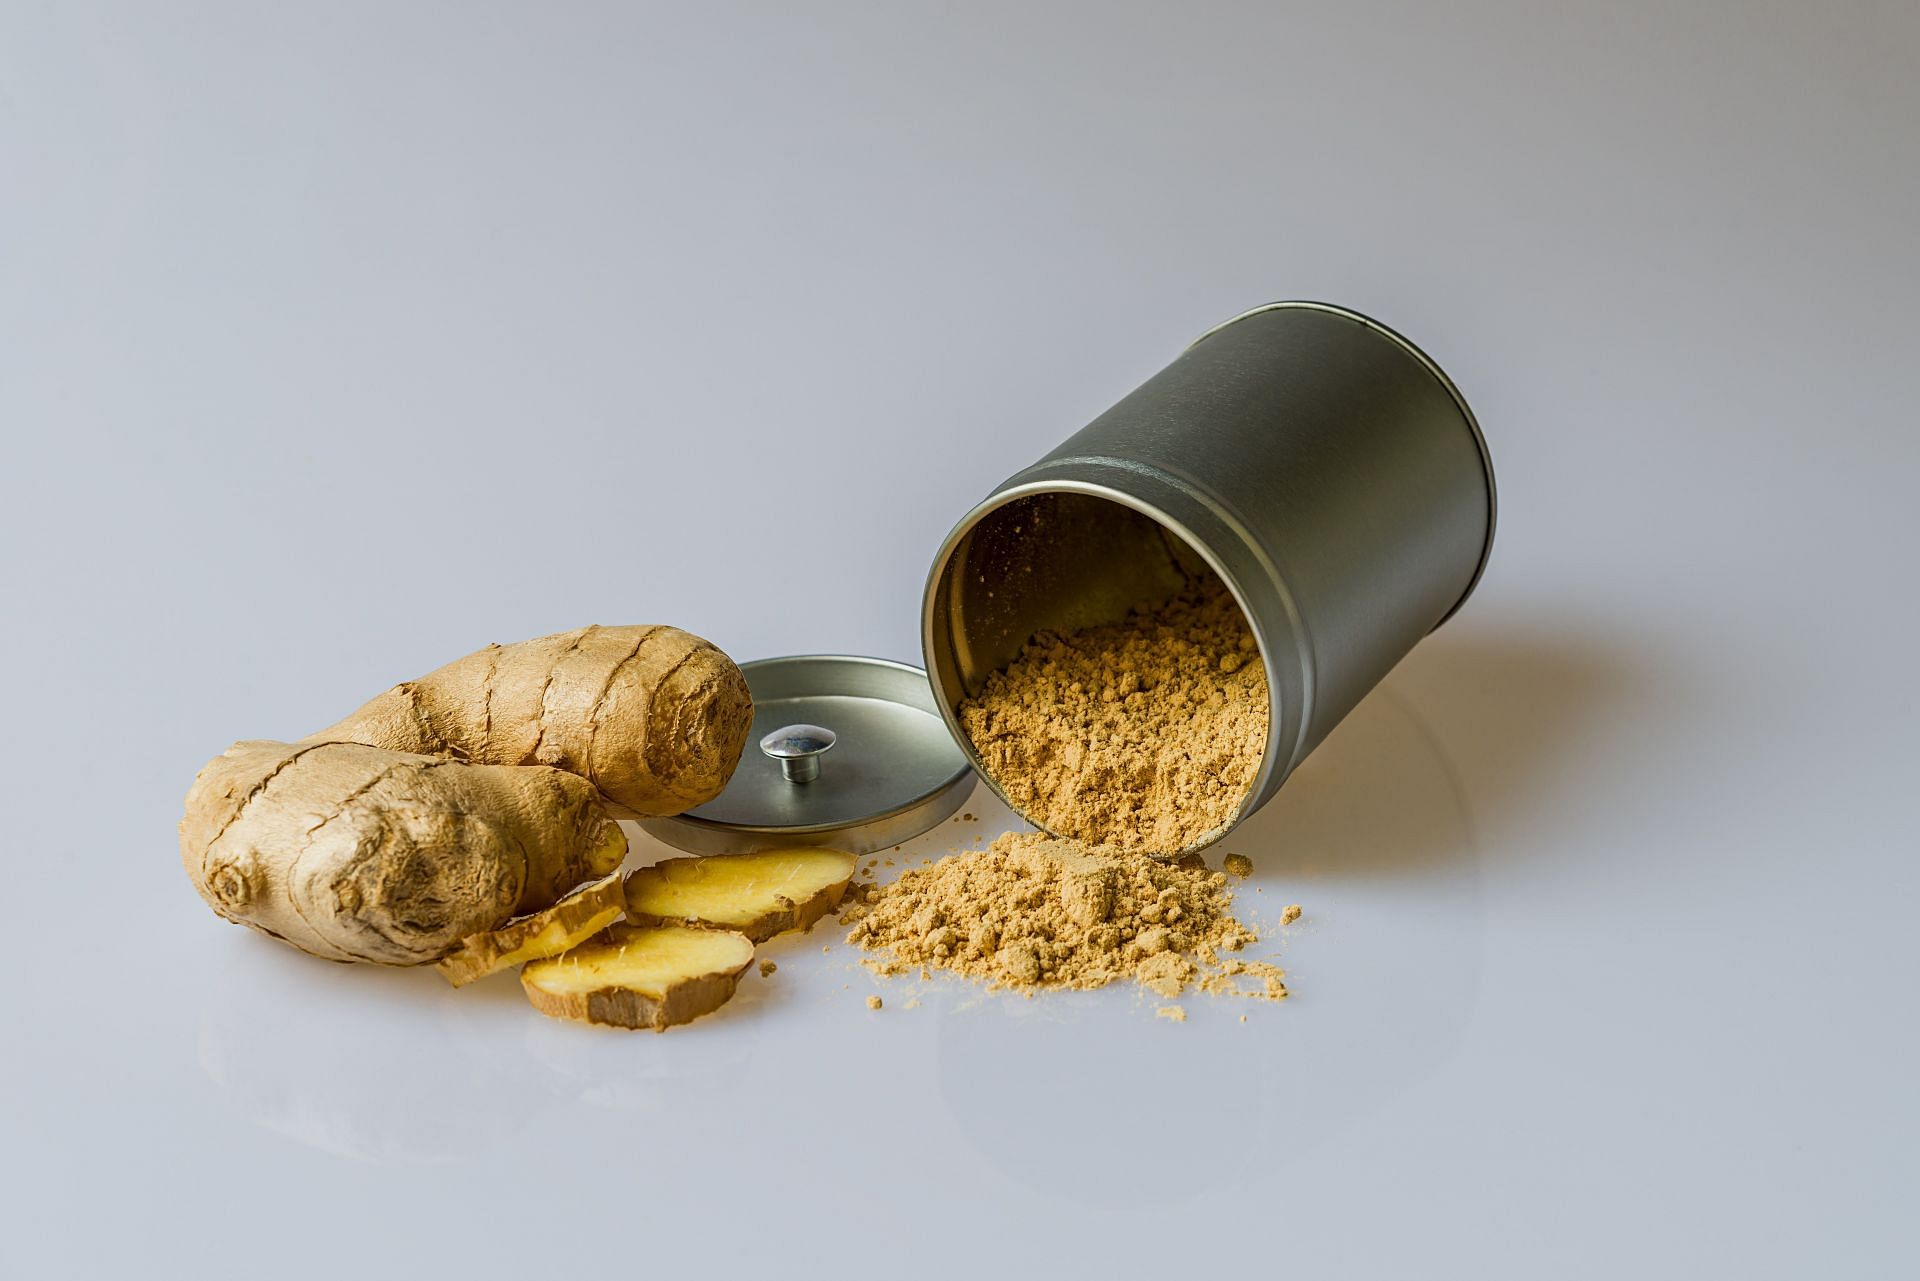 Home remedies for migraine : Ginger contains anti-inflammatory properties. (Image via Pexels / Pixabay)